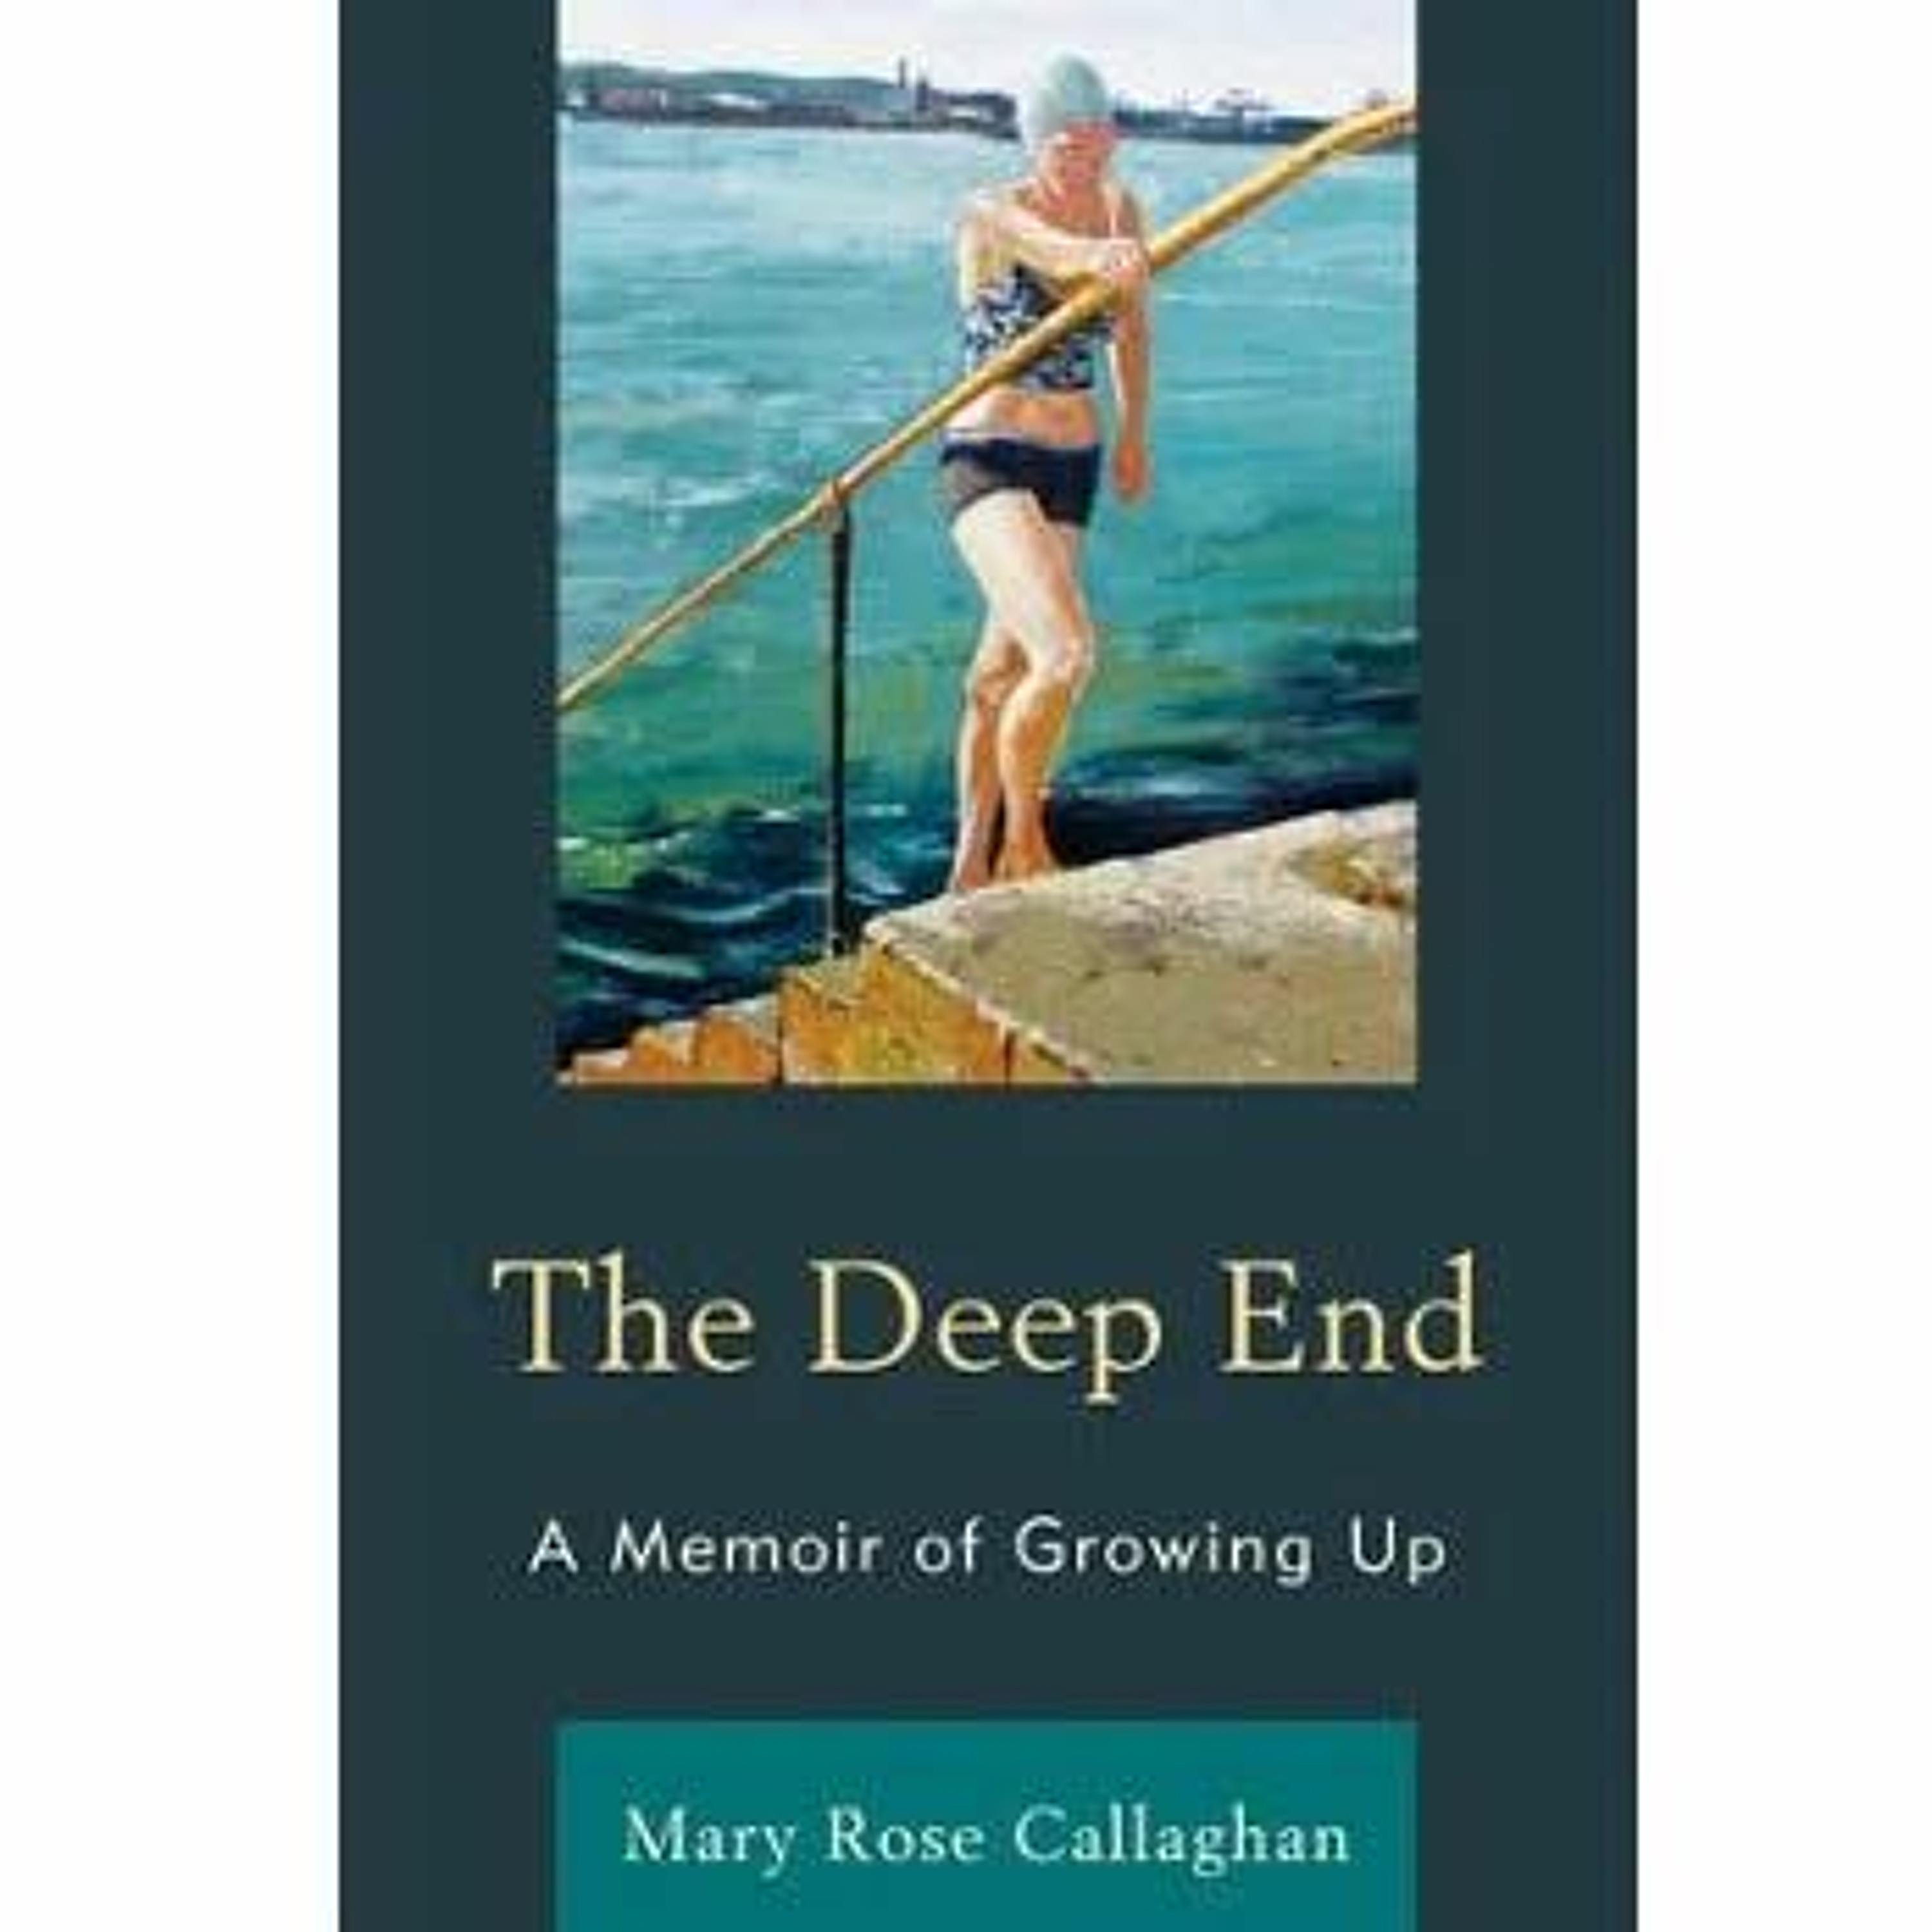 Gary Cooke talks to Mary Rose Callaghan about her memoir The Deep End